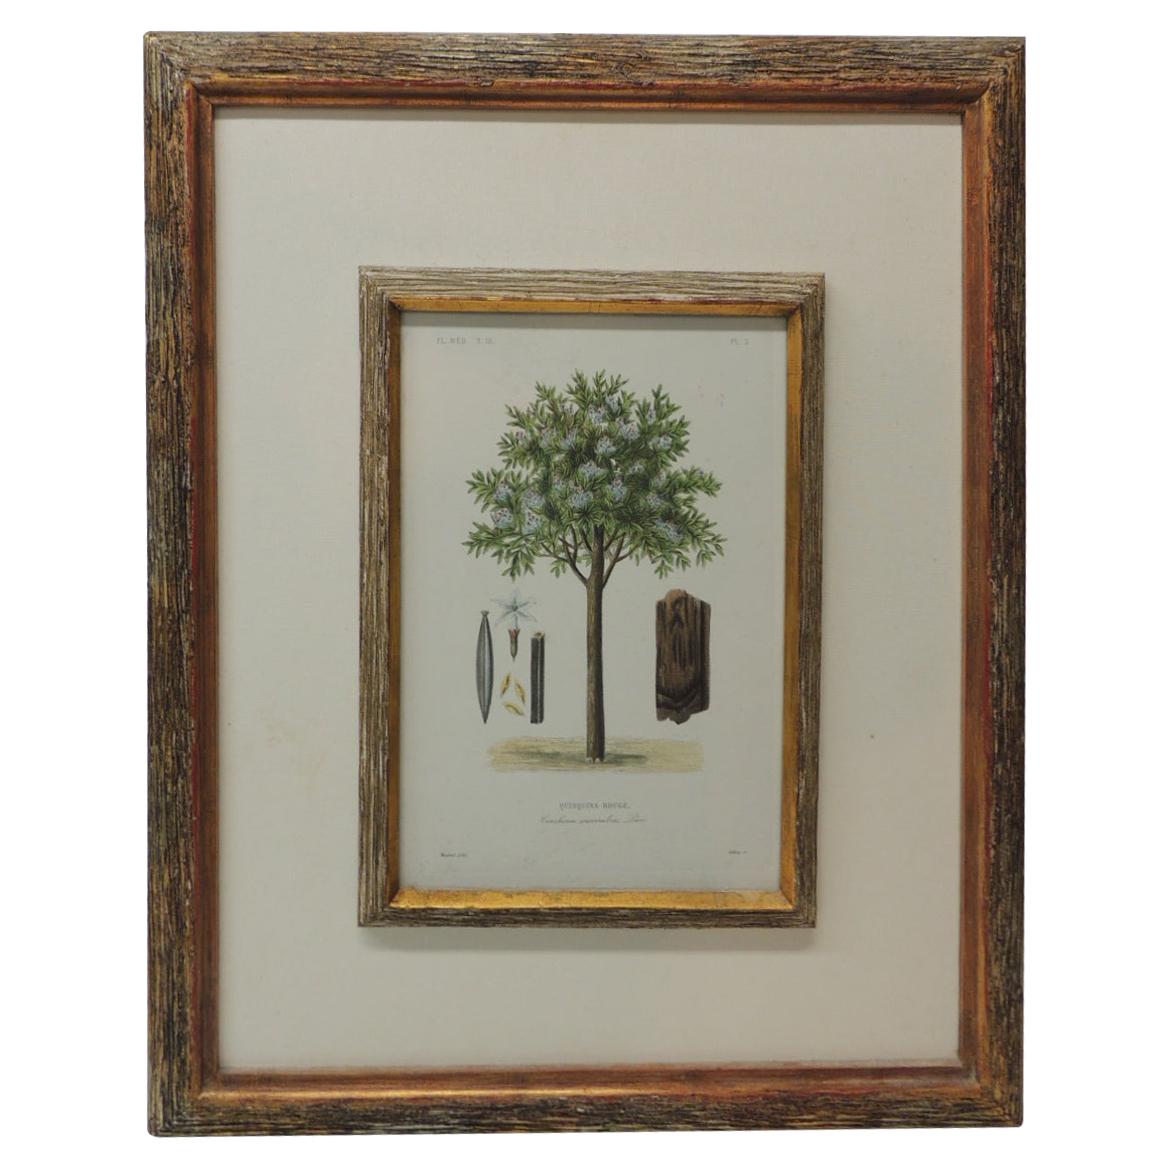 Framed Botanical Print in a Wood Bark Style Frame with Gold Leaf Accents